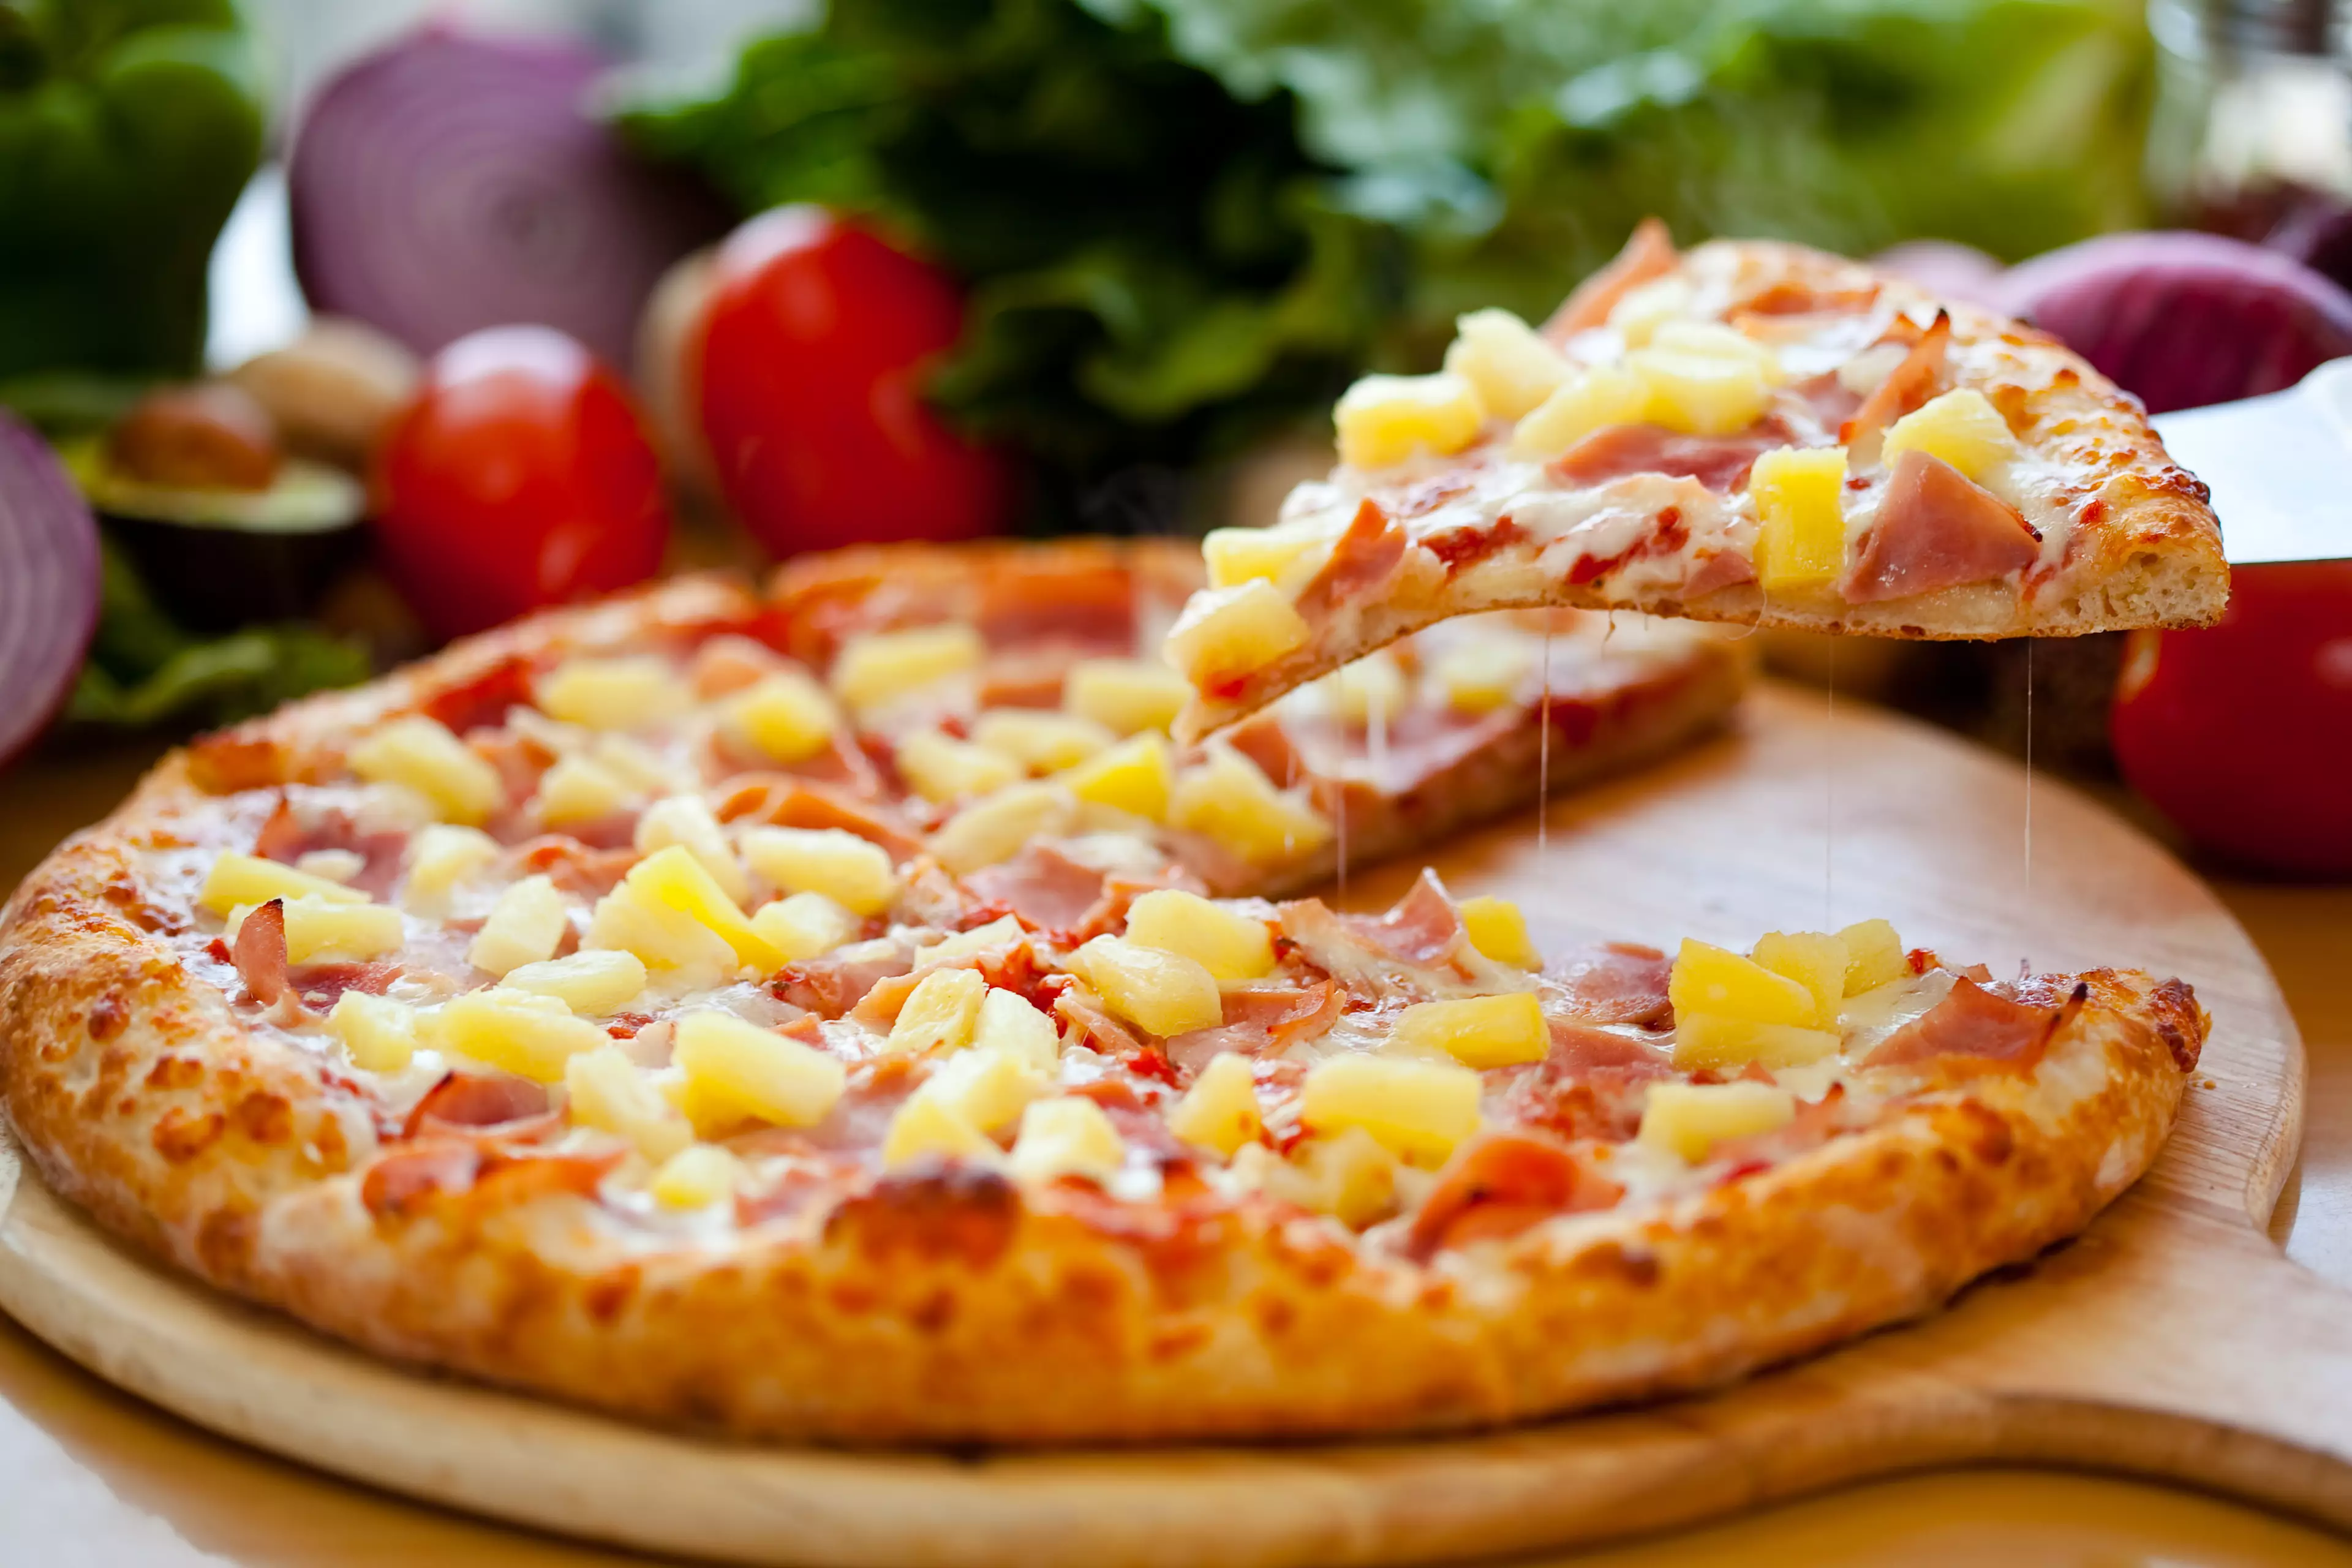 A nutritionist might have settled the debate about pineapple on pizza (